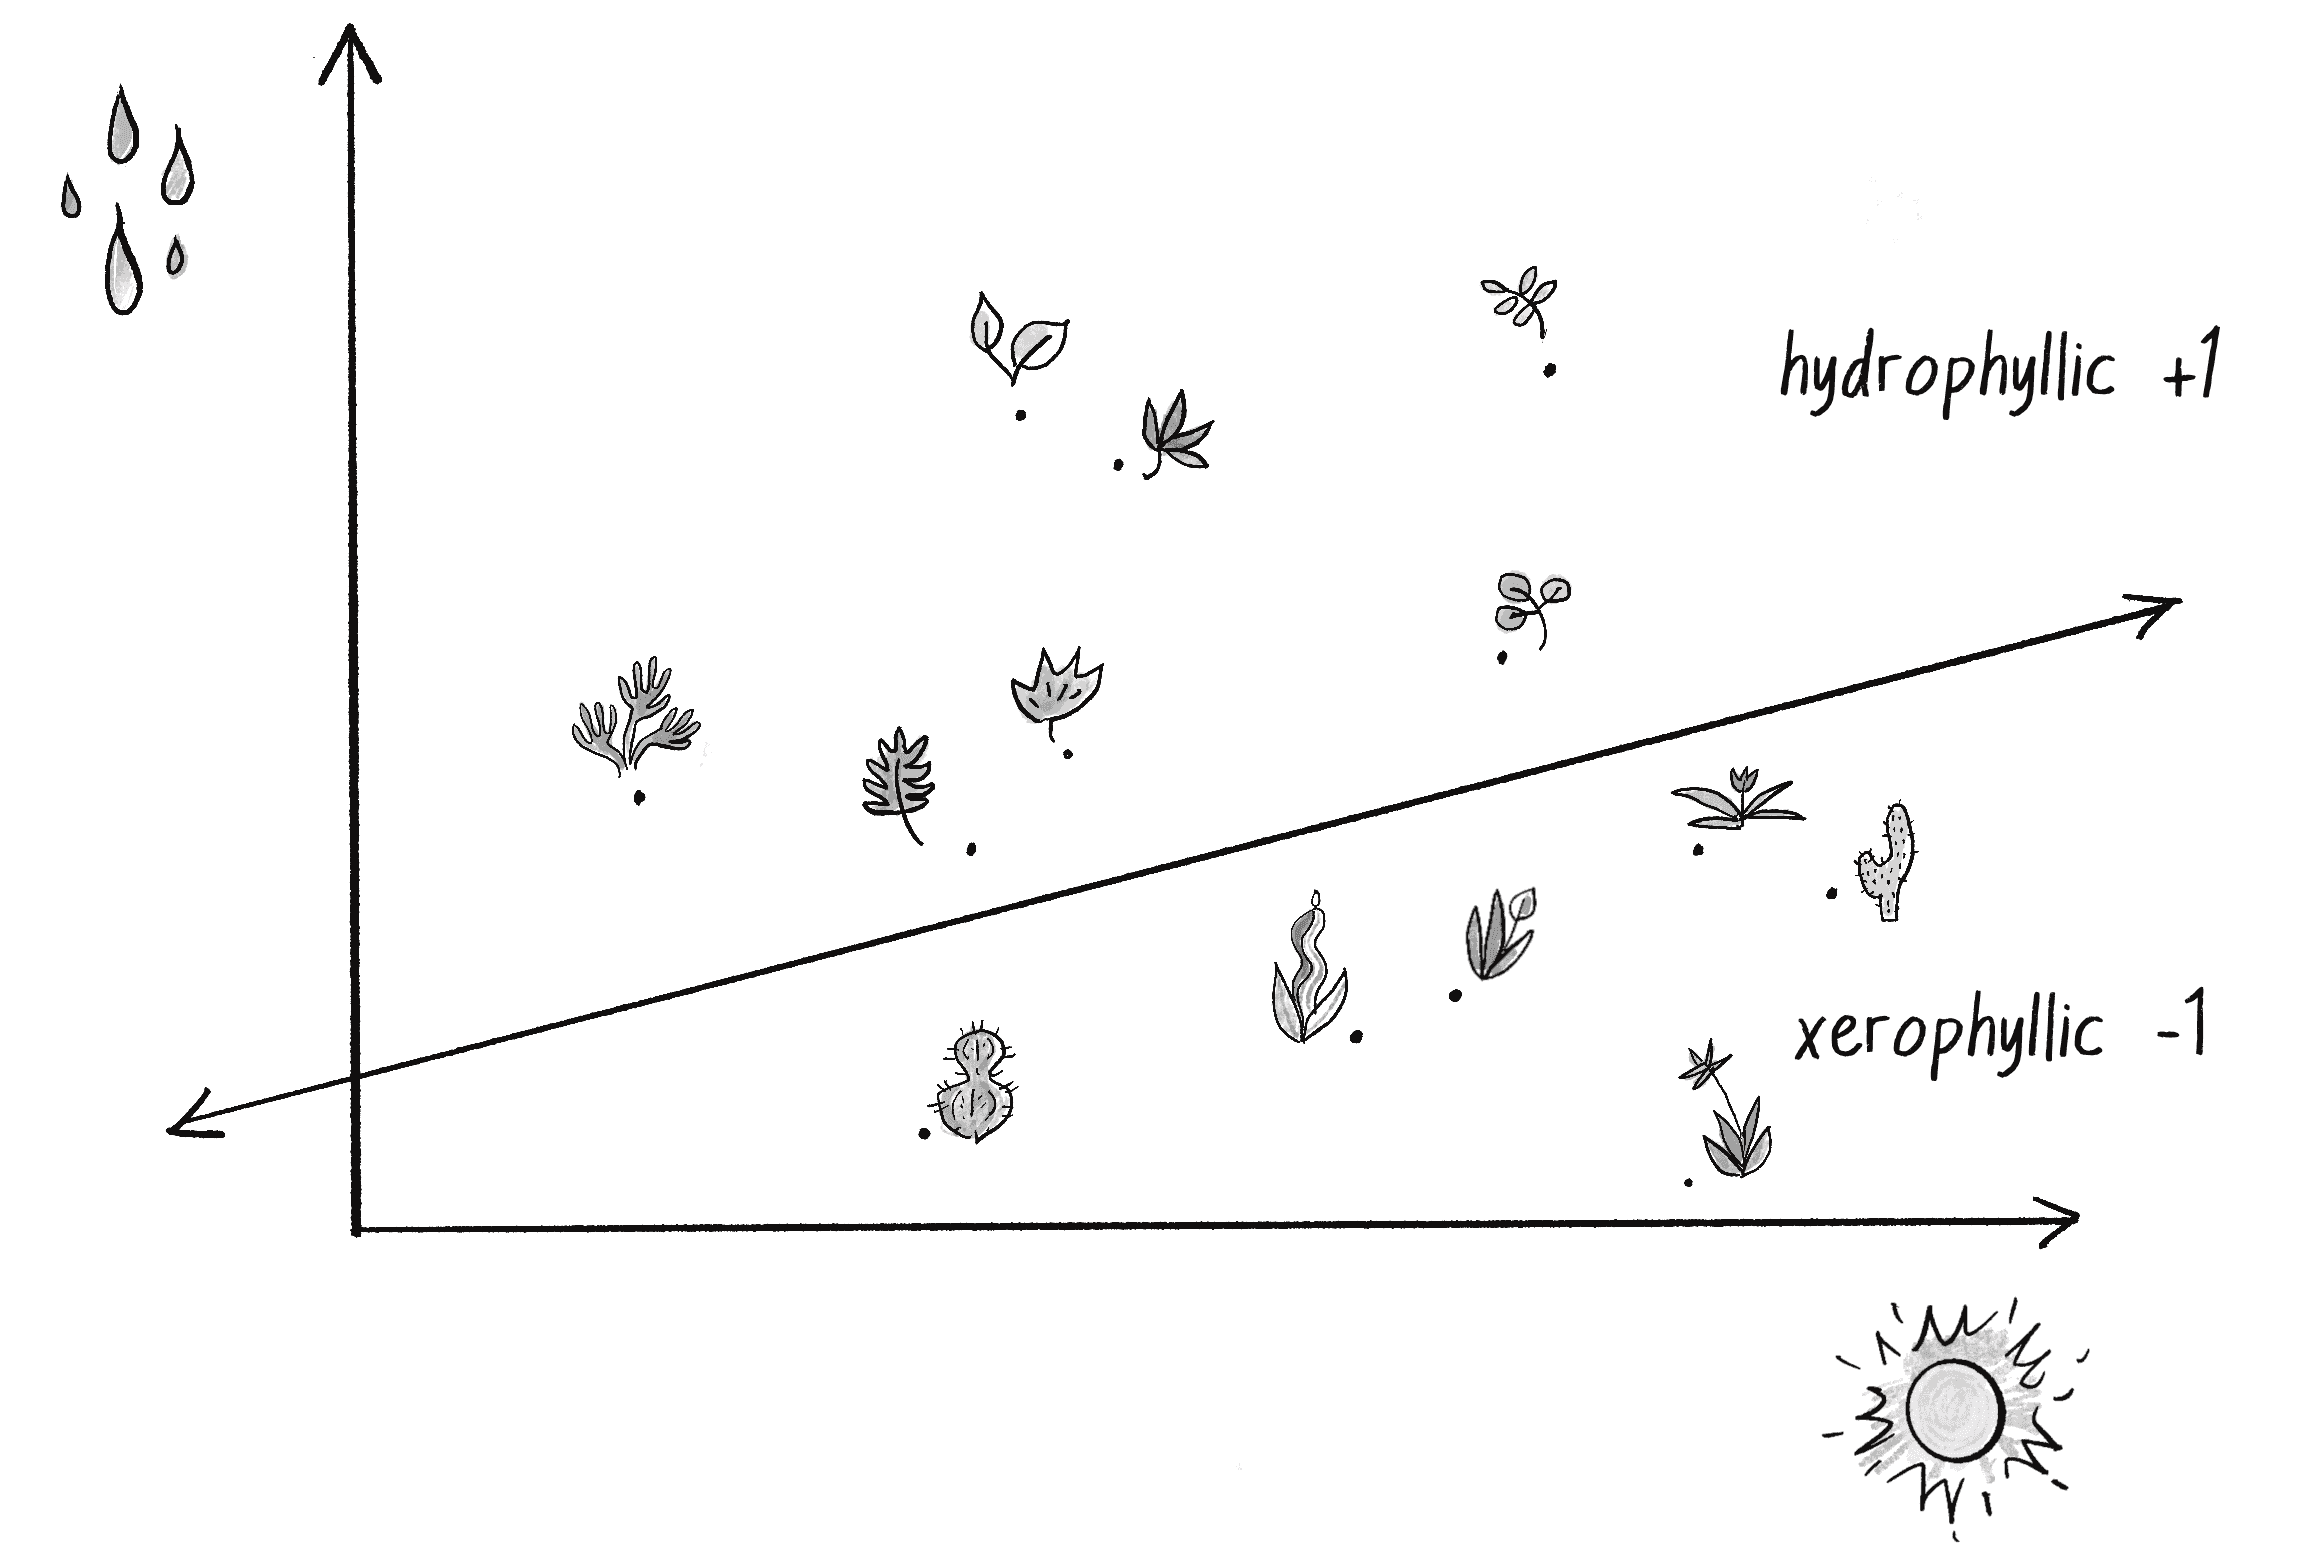 Figure 10.4: A collection of points in two dimensional space divided by a line, representing plant categories according to their water and sunlight intake 